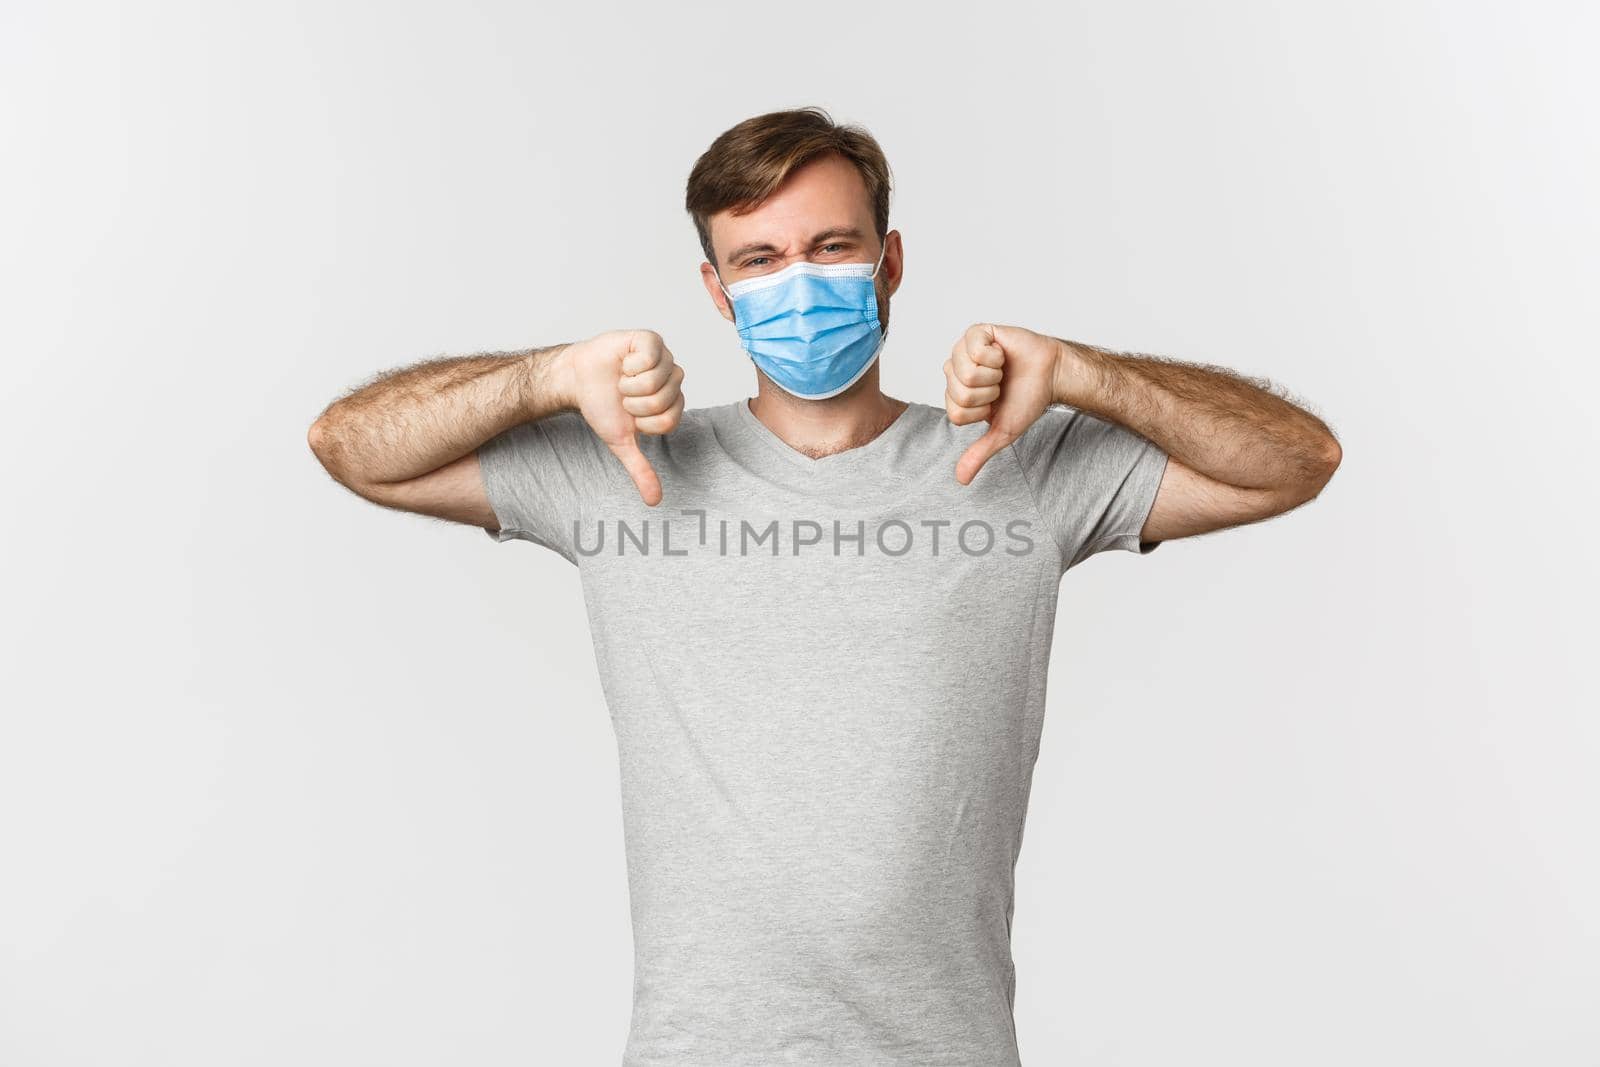 Concept of pandemic, covid-19 and social-distancing. Portrait of man hate wearing medical mask, complaining and showing thumbs-down, standing over white background.